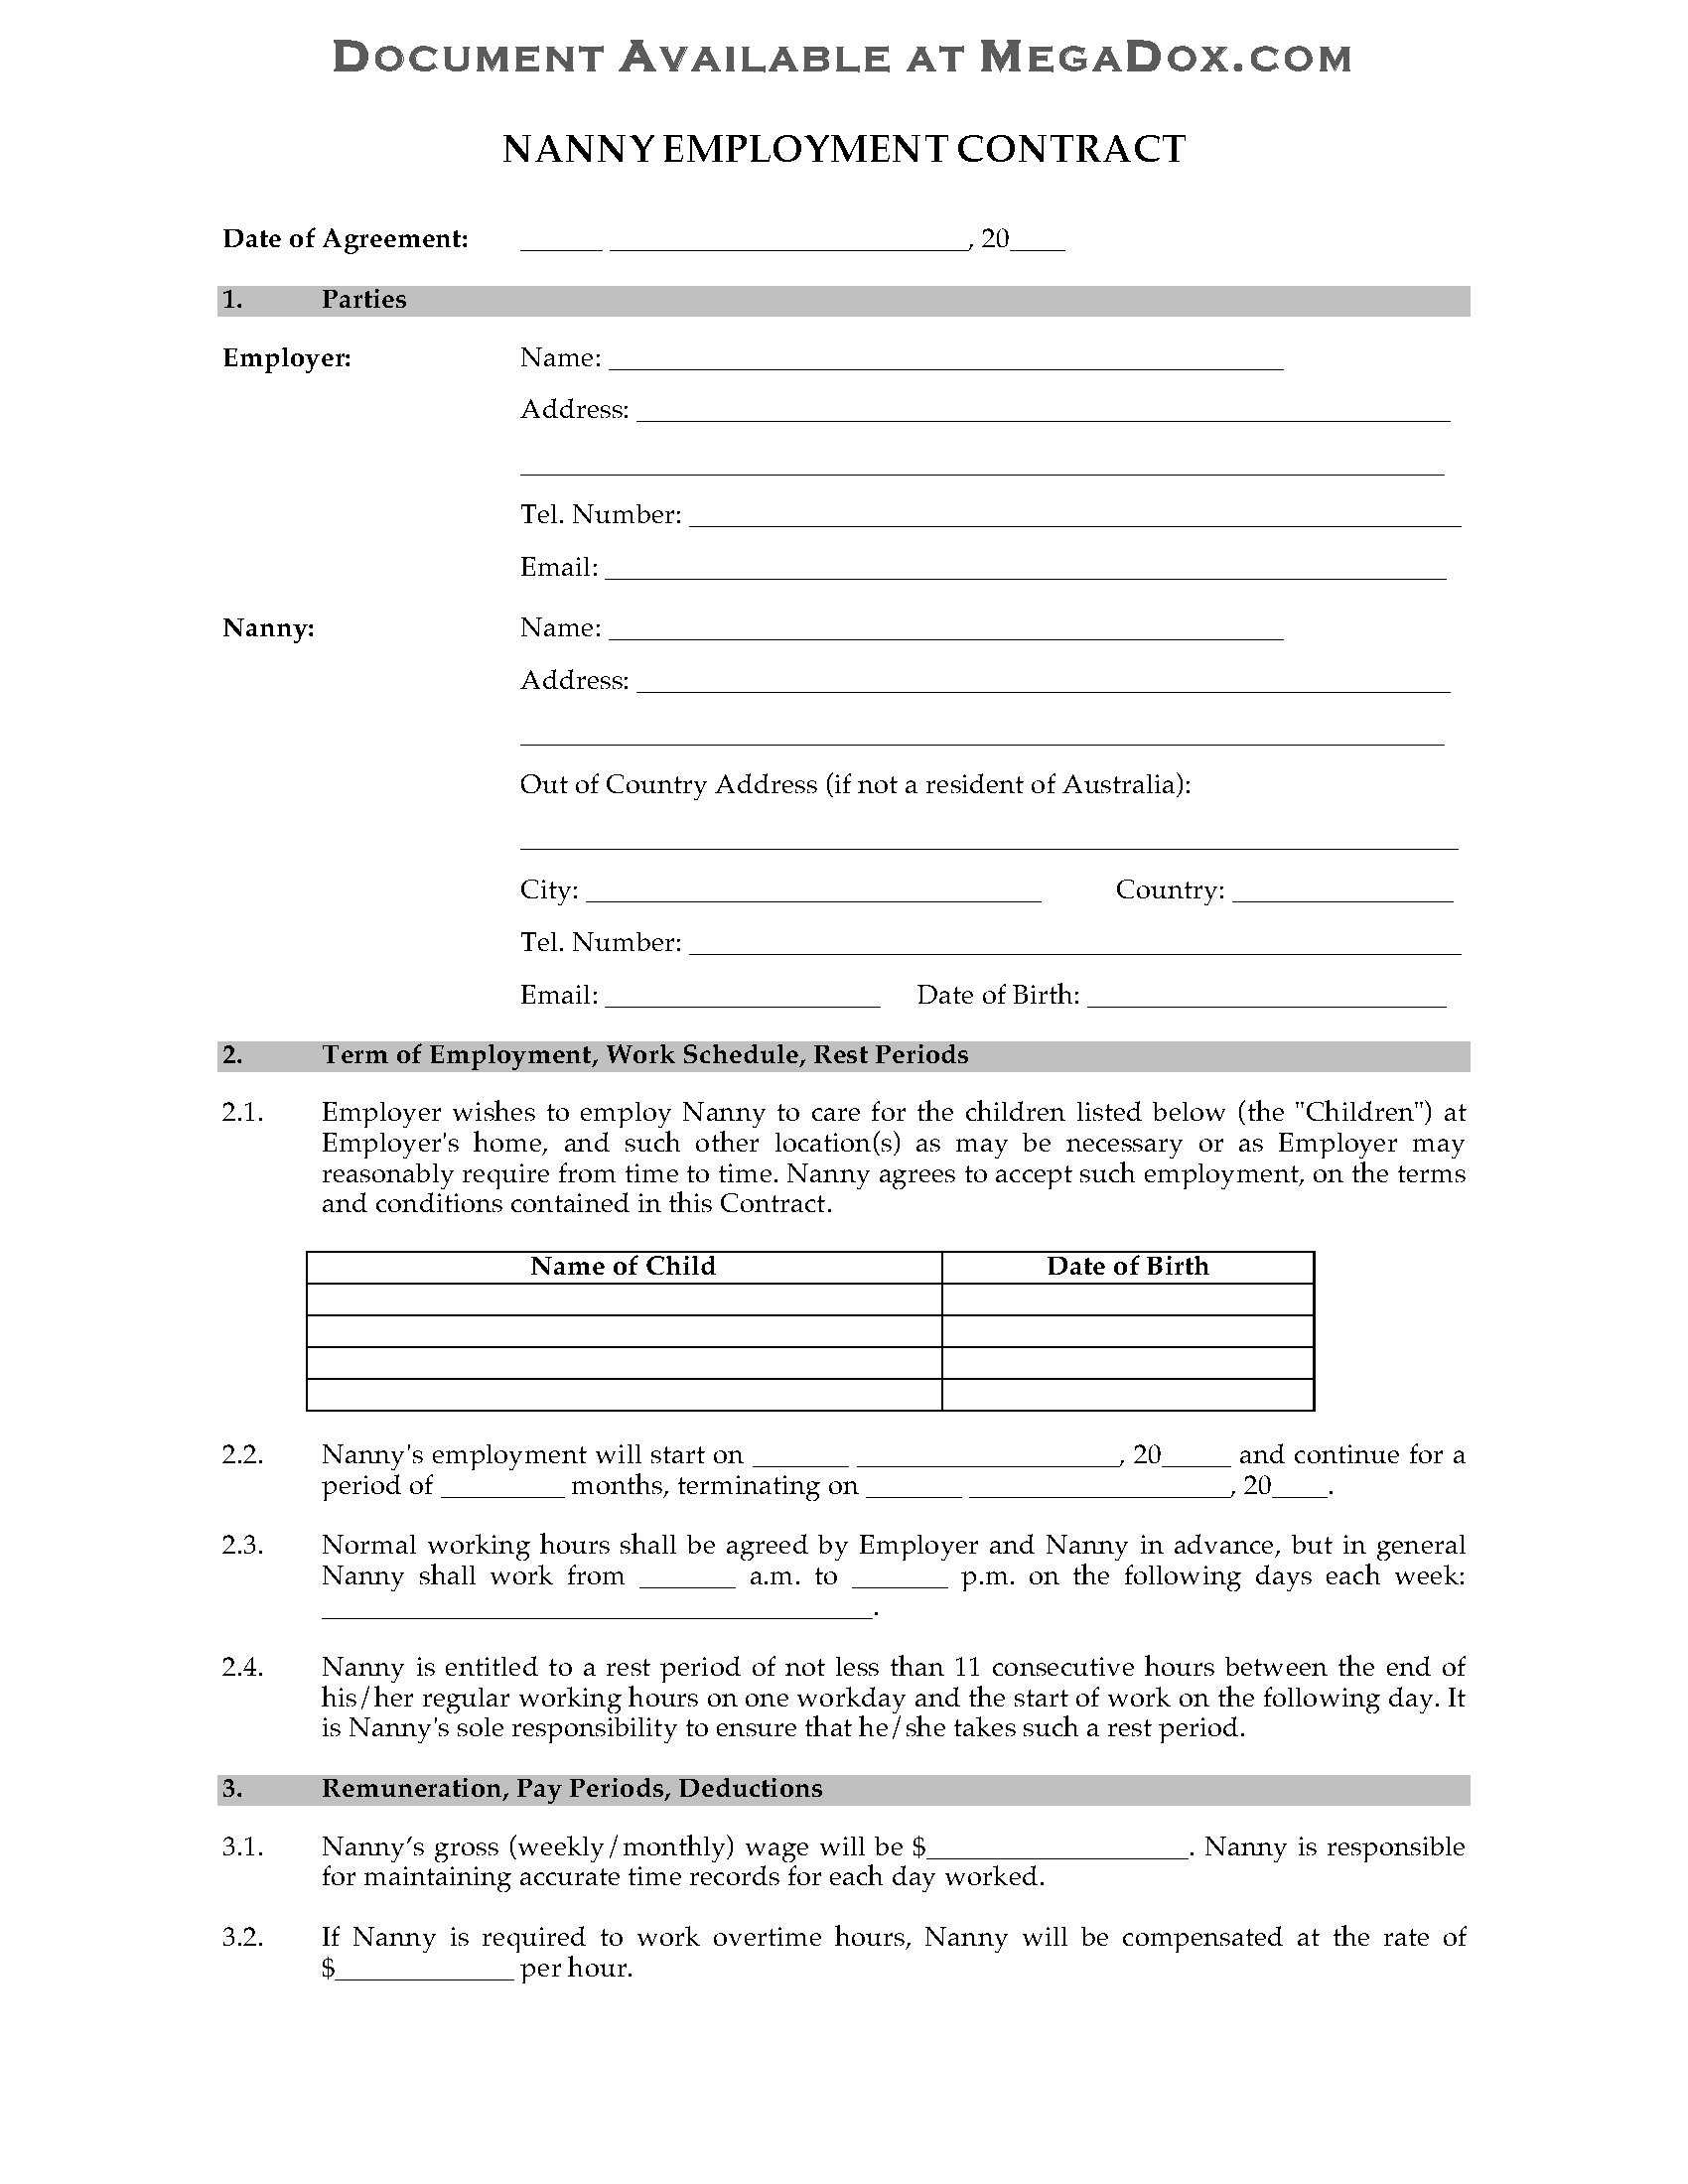 Australia Nanny Employment Contract For Nanny Contract Template Word